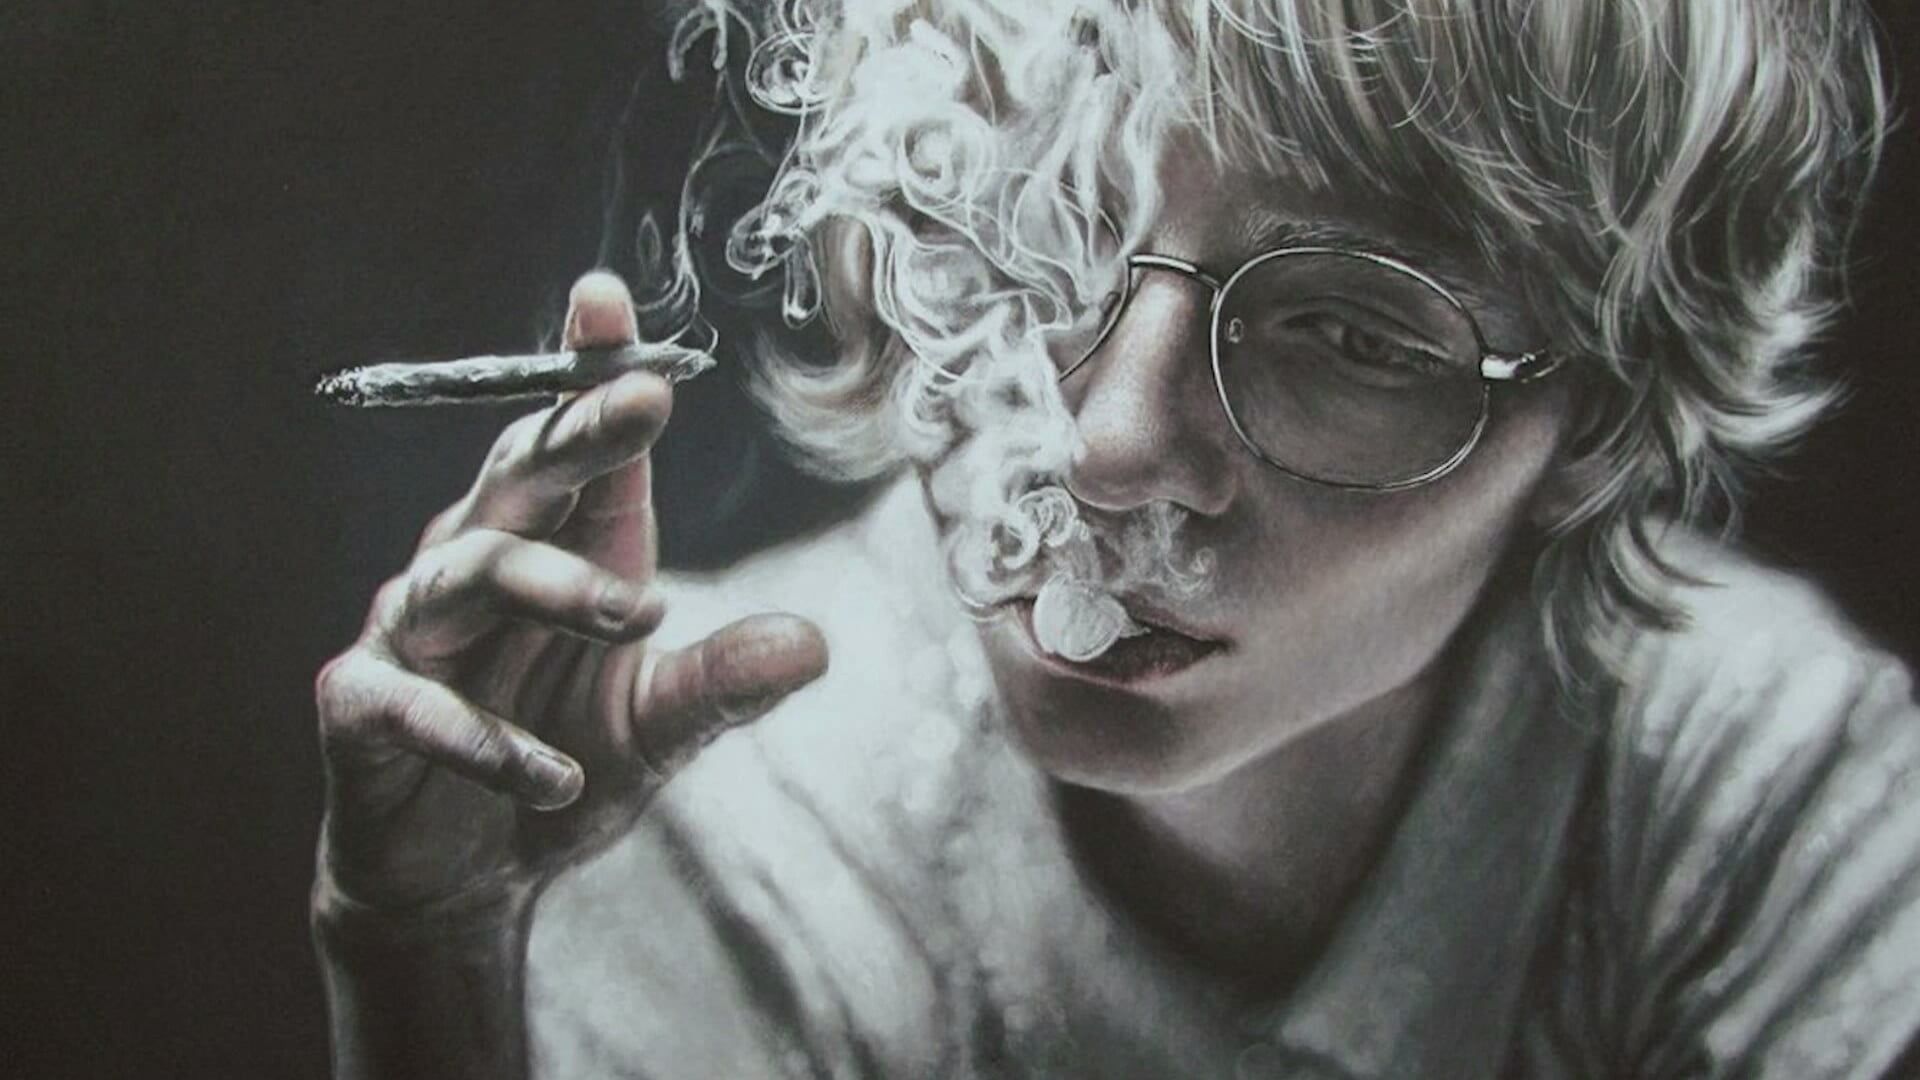 A drawing of a young man smoking a joint. - Smoke